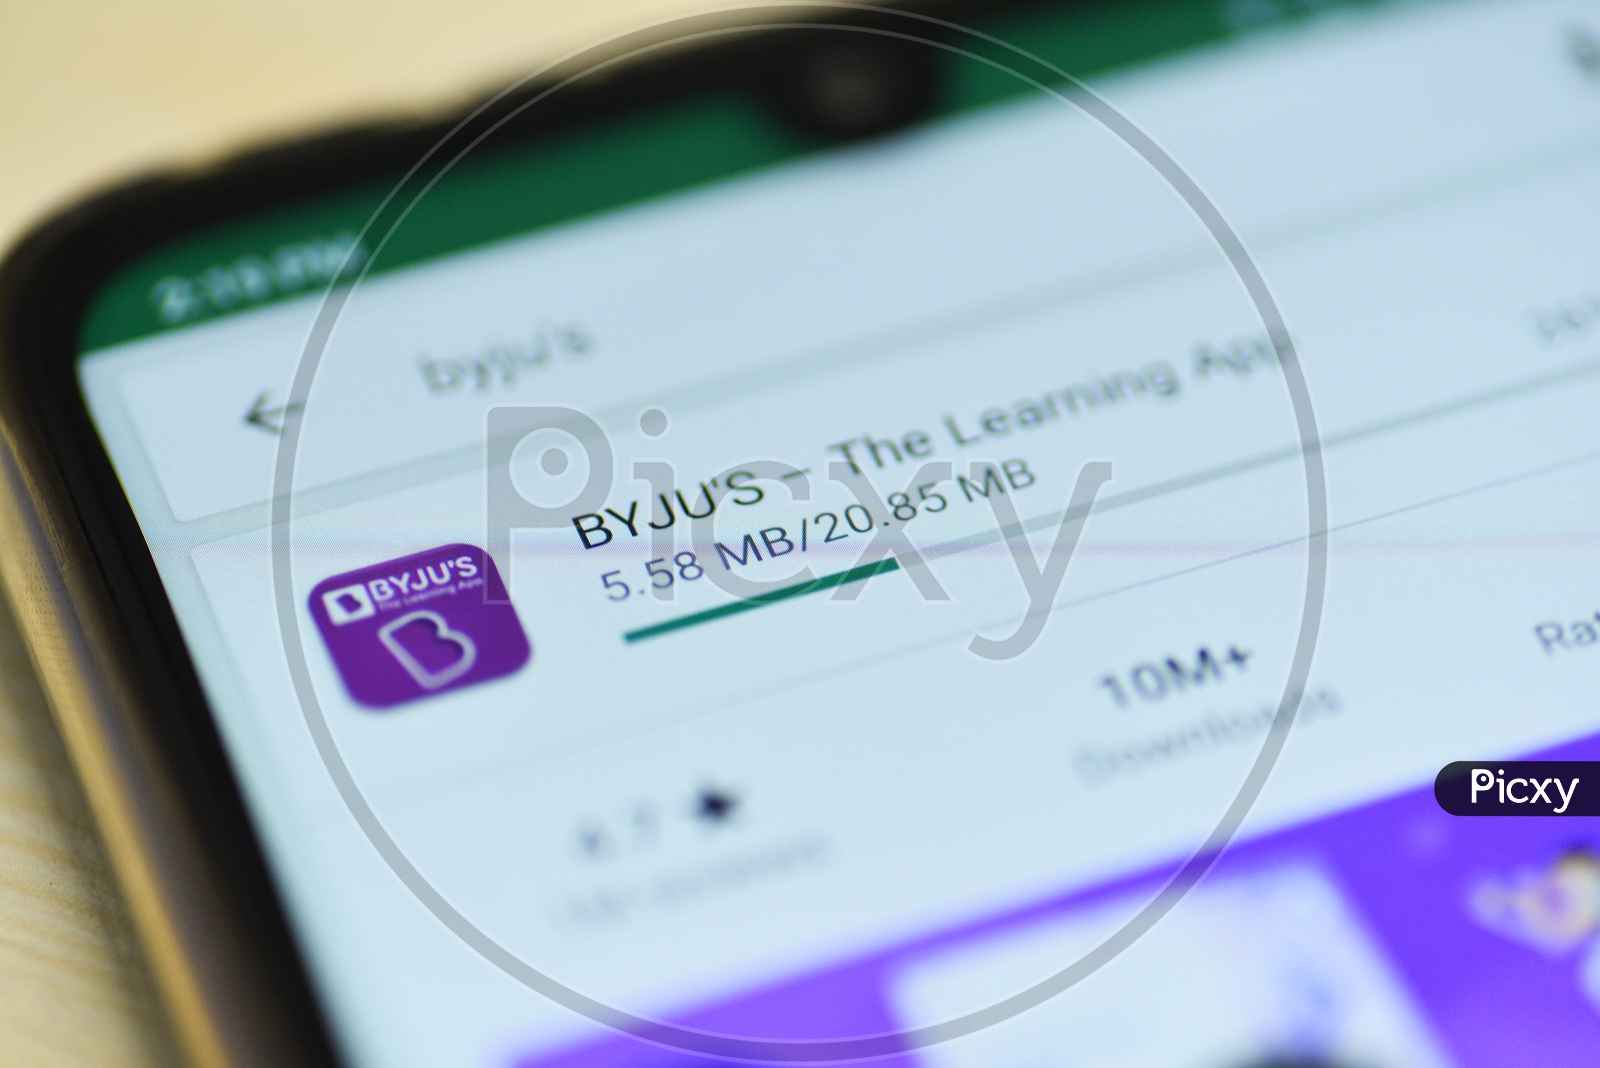 BYJU's Or BYJUS The Learning App or Application Being Installing  in  Mobile  or Smartphone  Closeup